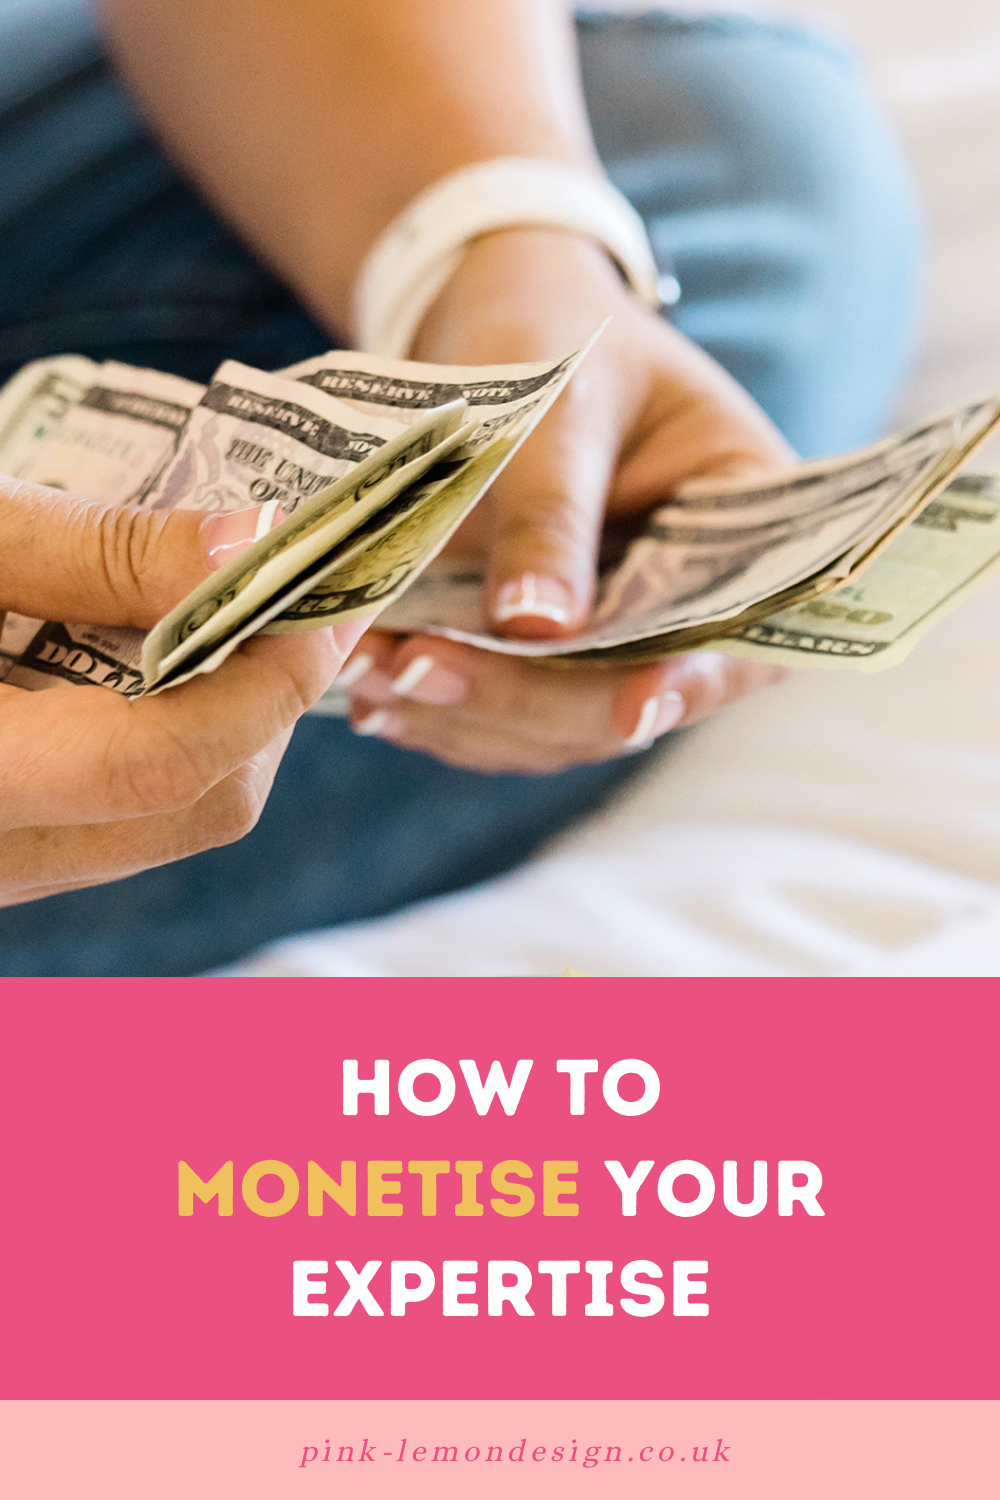 How to monetise your expertise